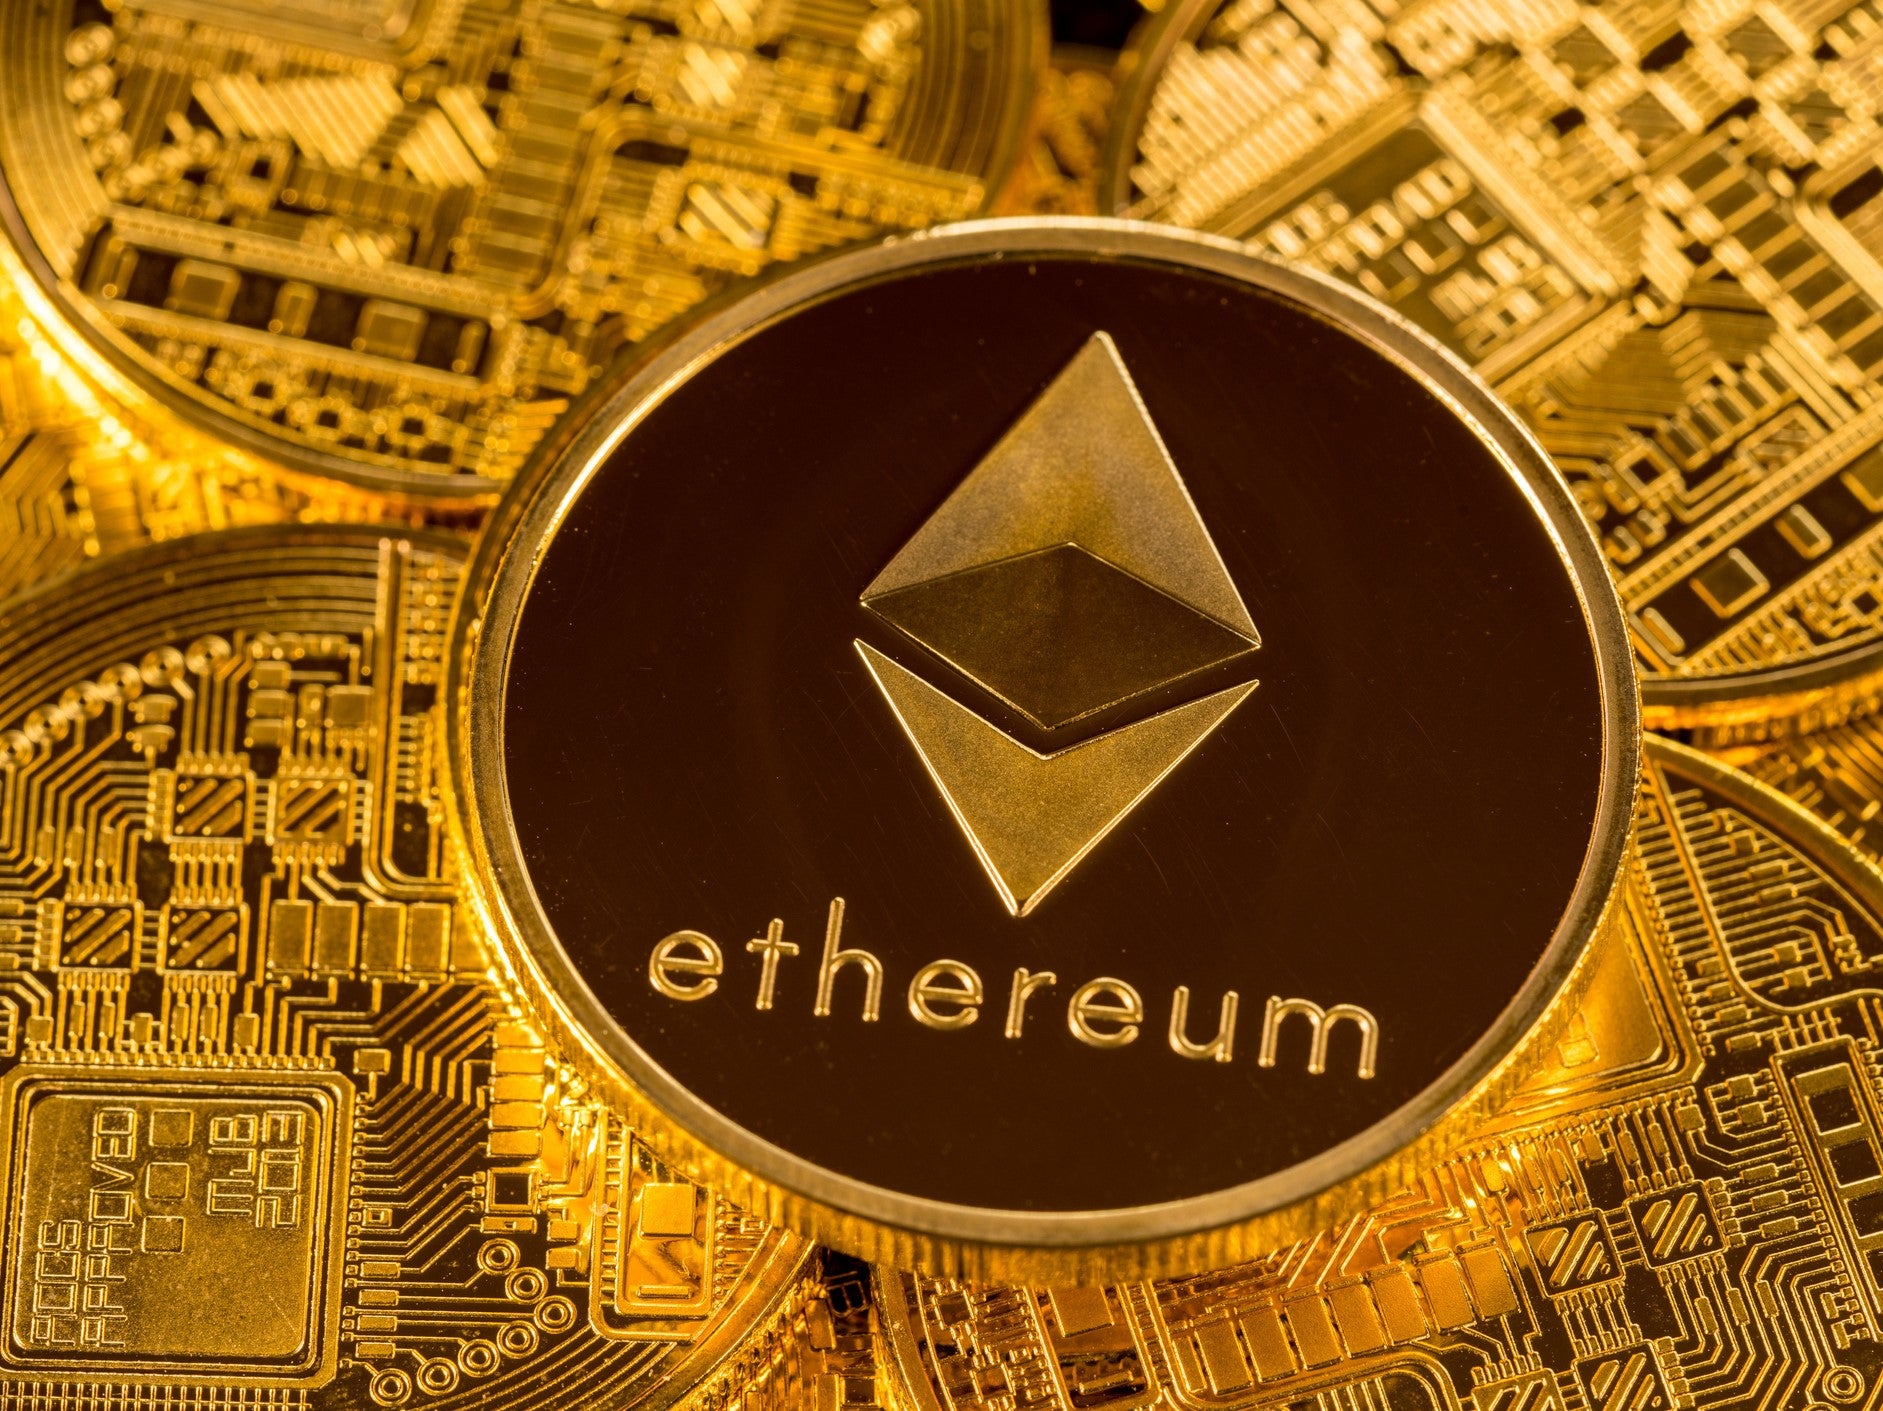 The price of ethereum (ether) bucked market trends to hit a new all-time high on 22 April, 2021